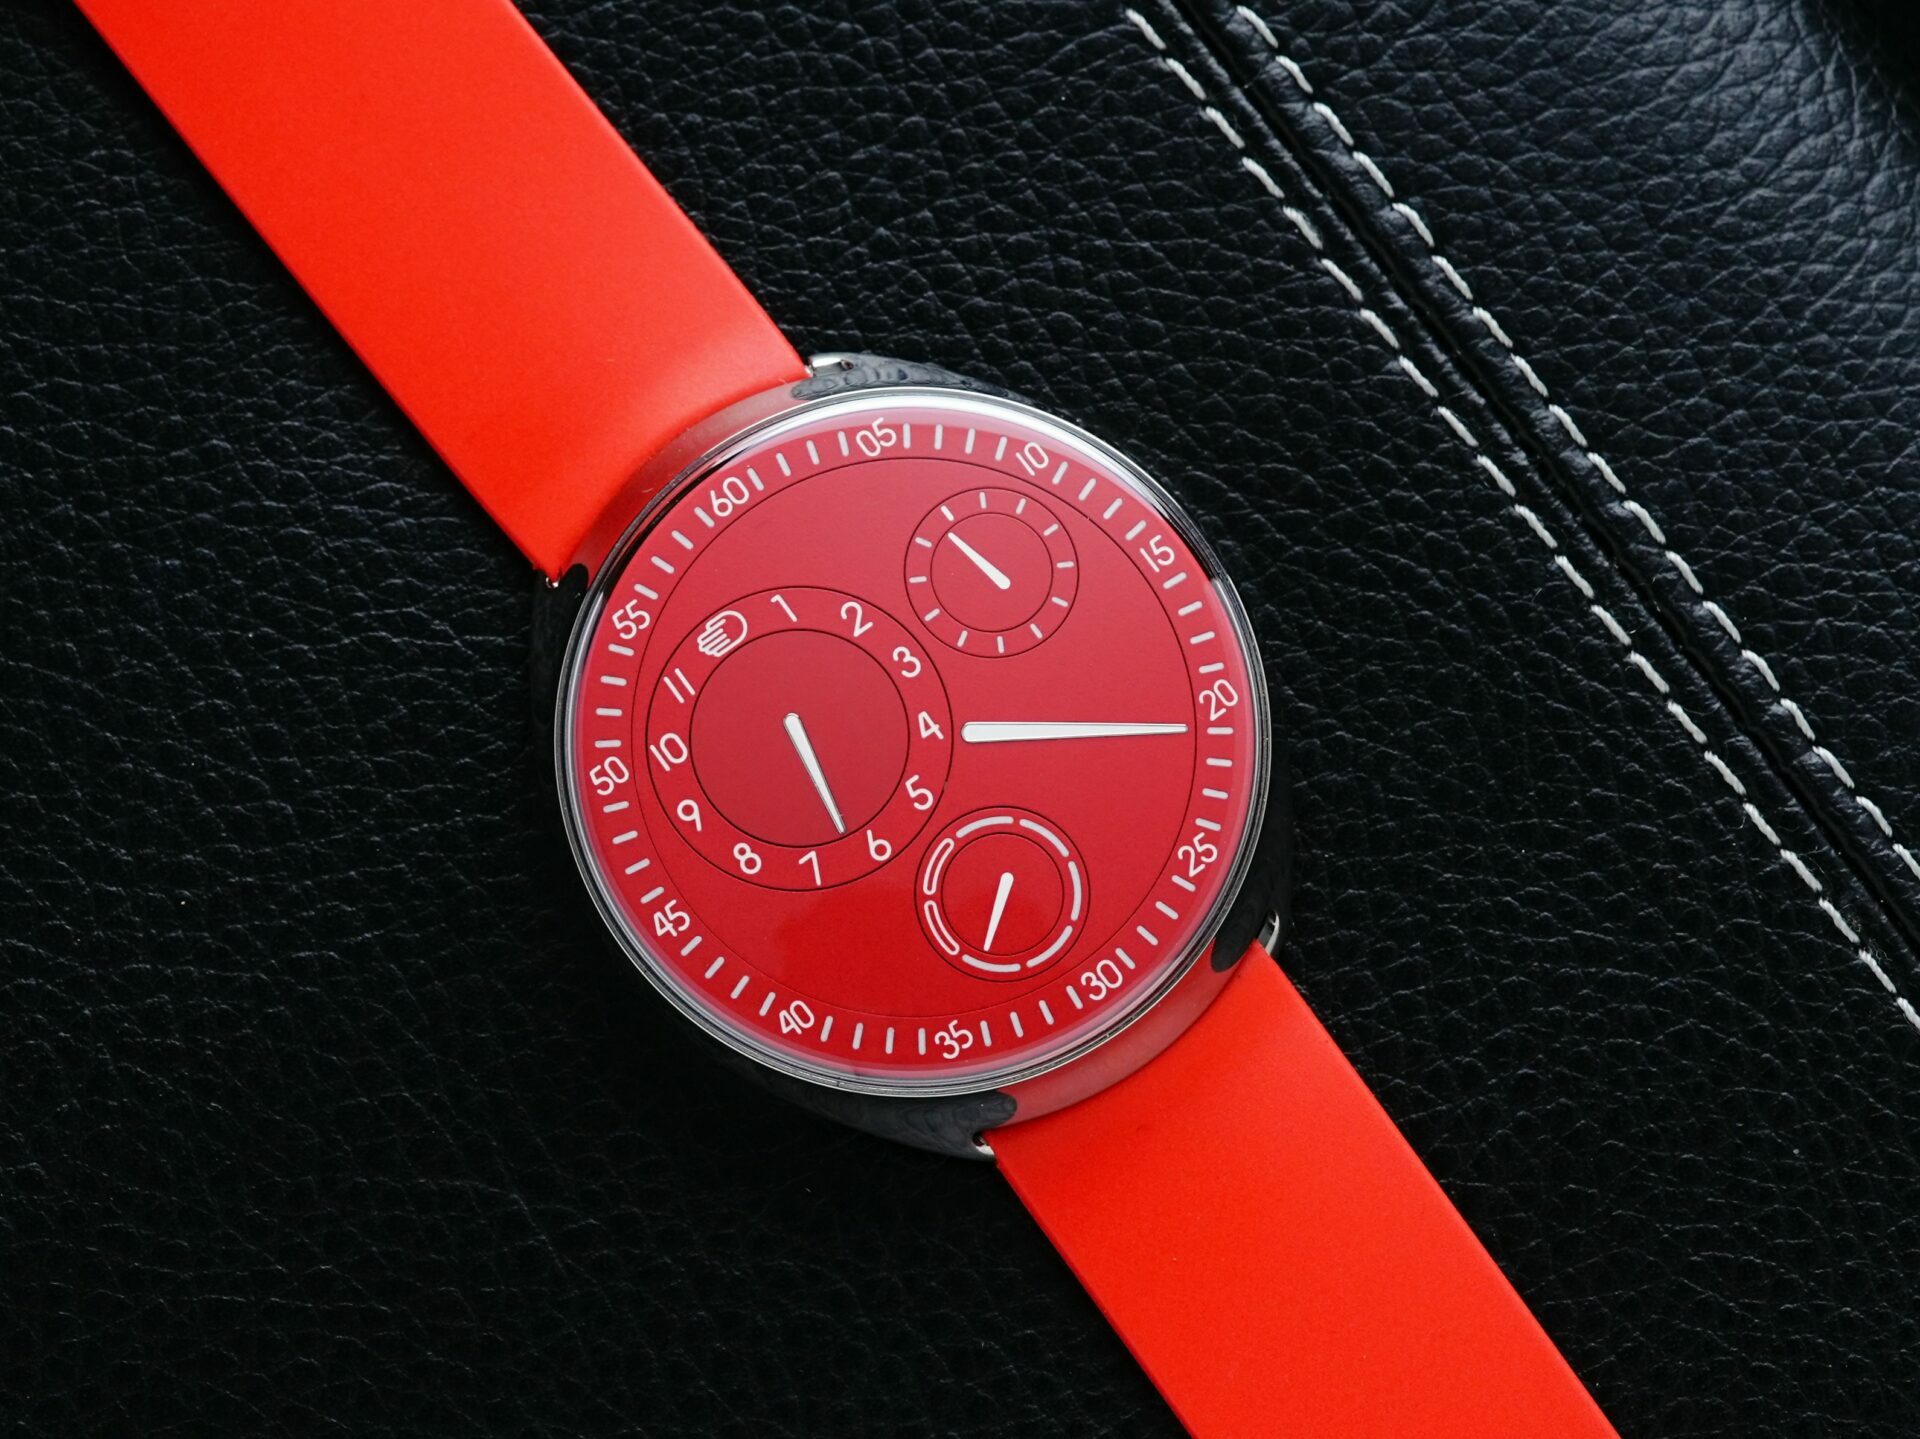 Ressence Type 1 Red Slim setting on leather.